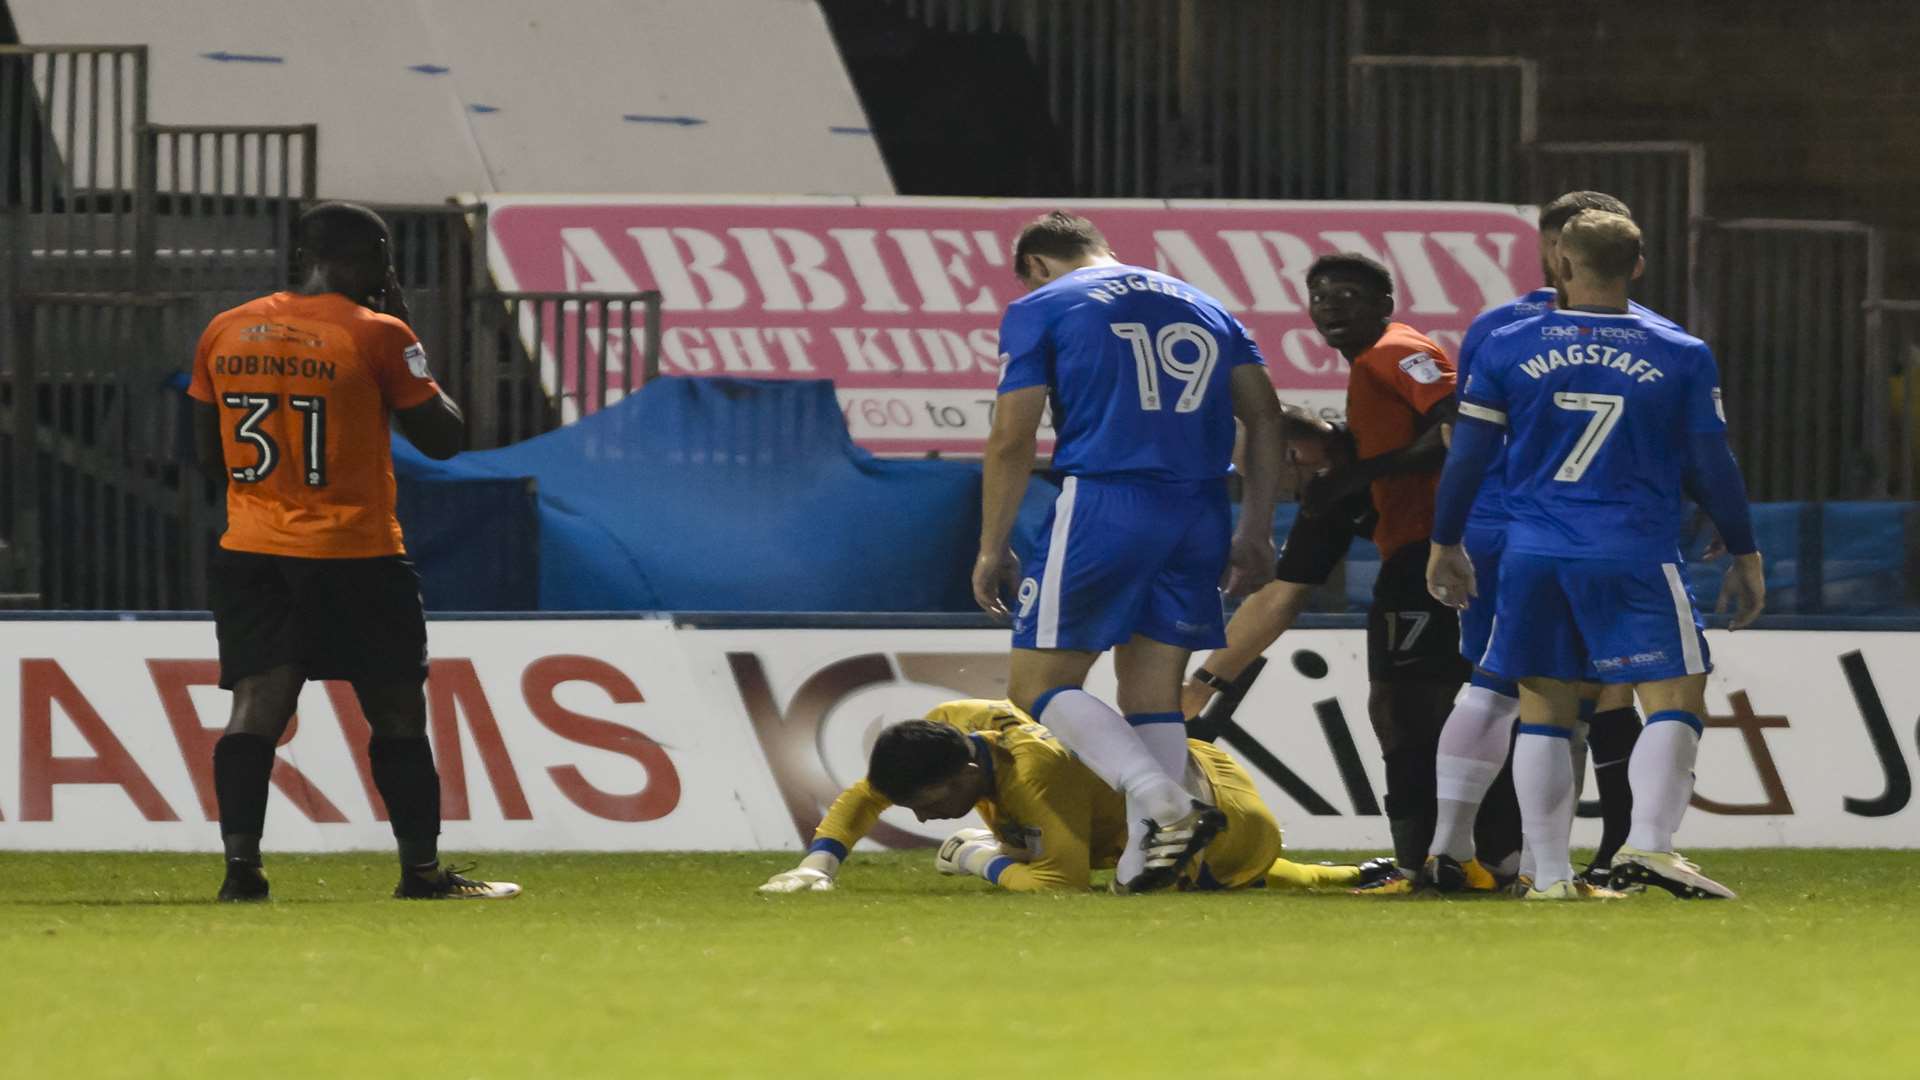 Gills keeper Steve Arnold goes down after a challenge from Jermaine McGlashan Picture: Andy Payton